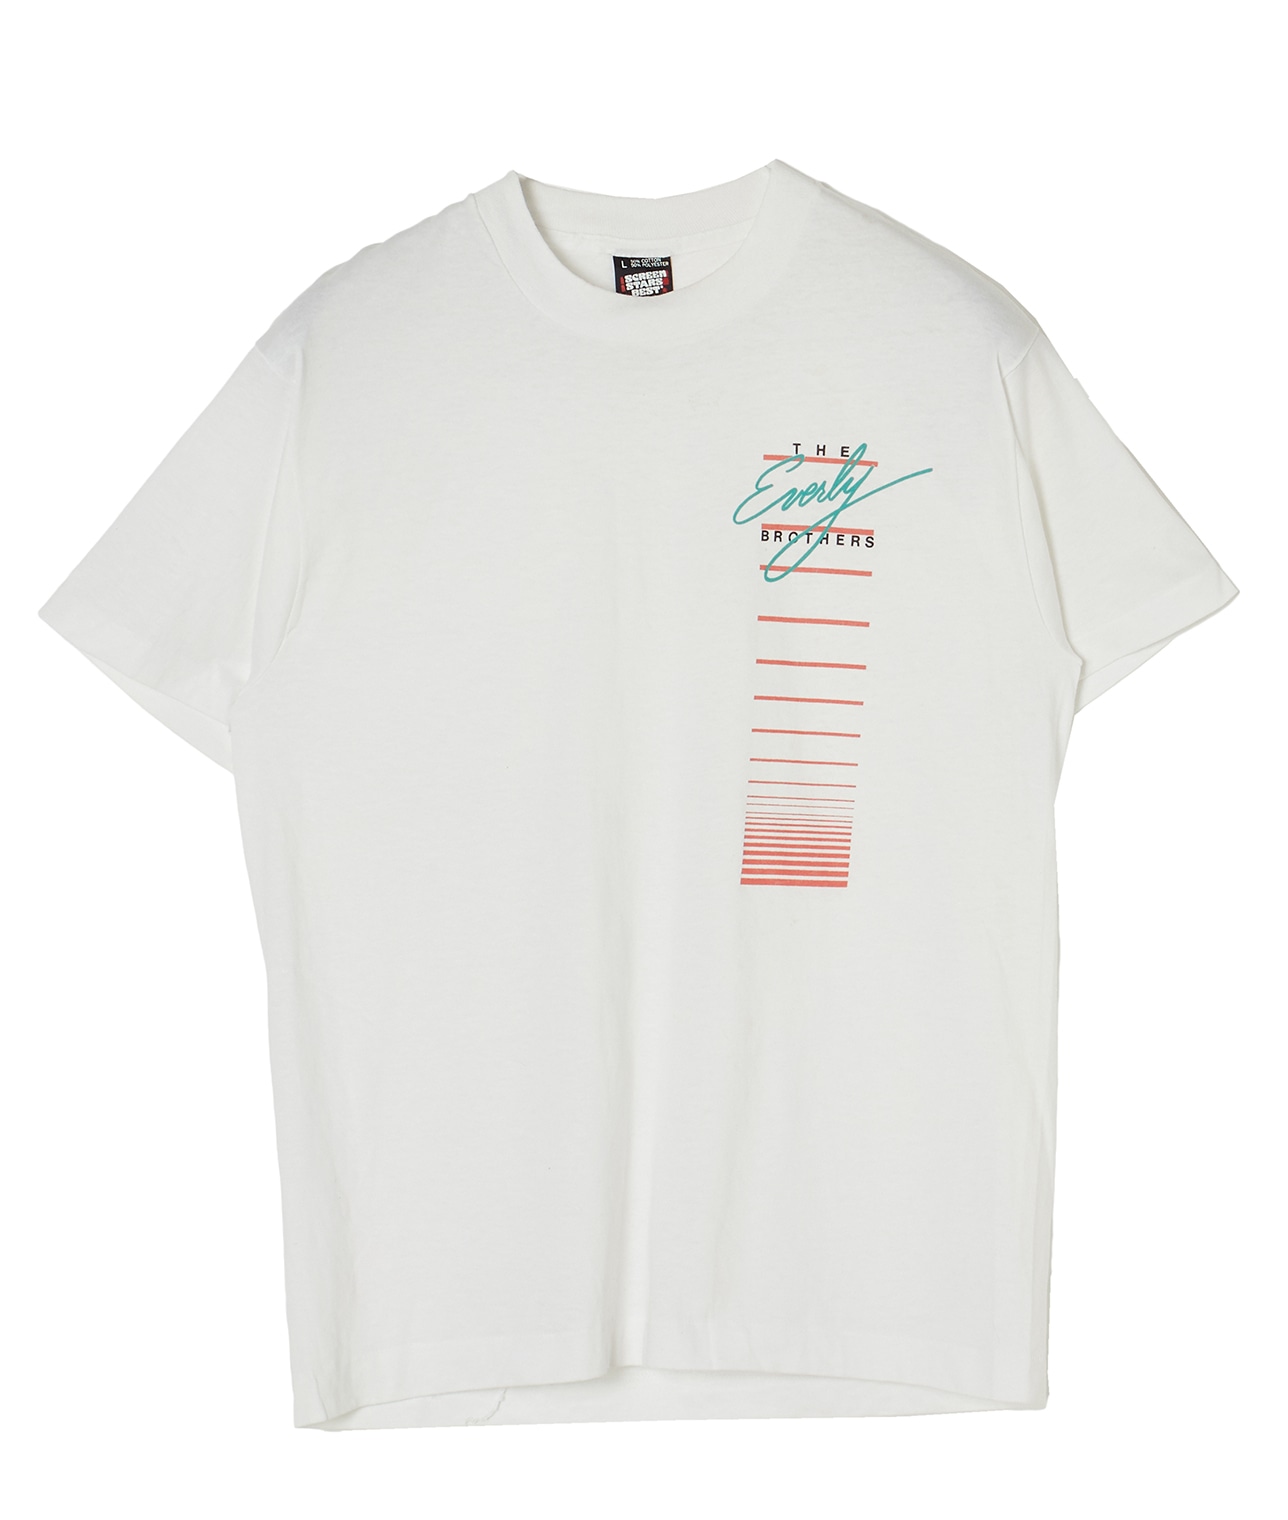 USED/THE Everly BROTHERS/プリントTシャツ 詳細画像 WHITE 1